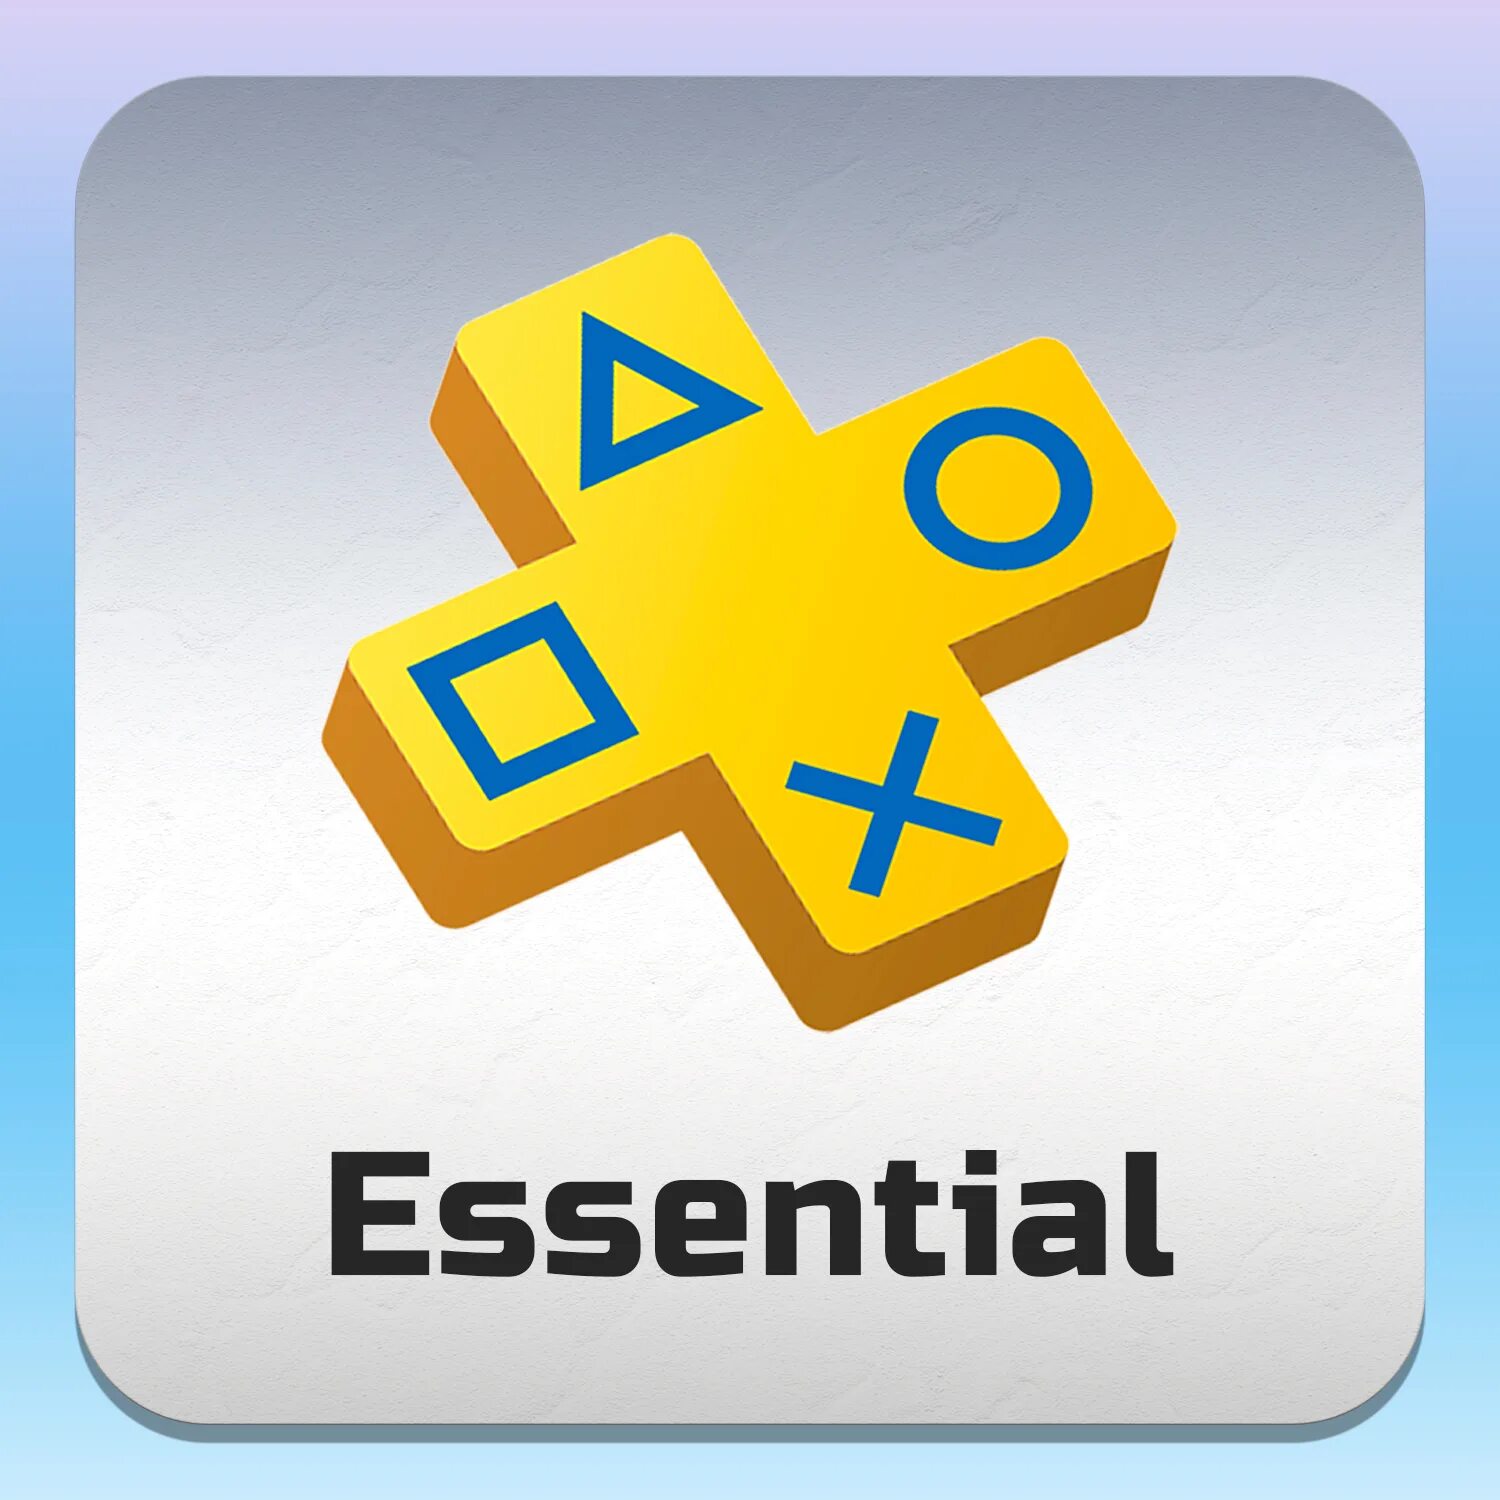 PLAYSTATION Plus Deluxe 12. PS Plus Essential Extra Deluxe. PLAYSTATION Plus Extra. PLAYSTATION Plus Essential. Playstation turkey ps plus